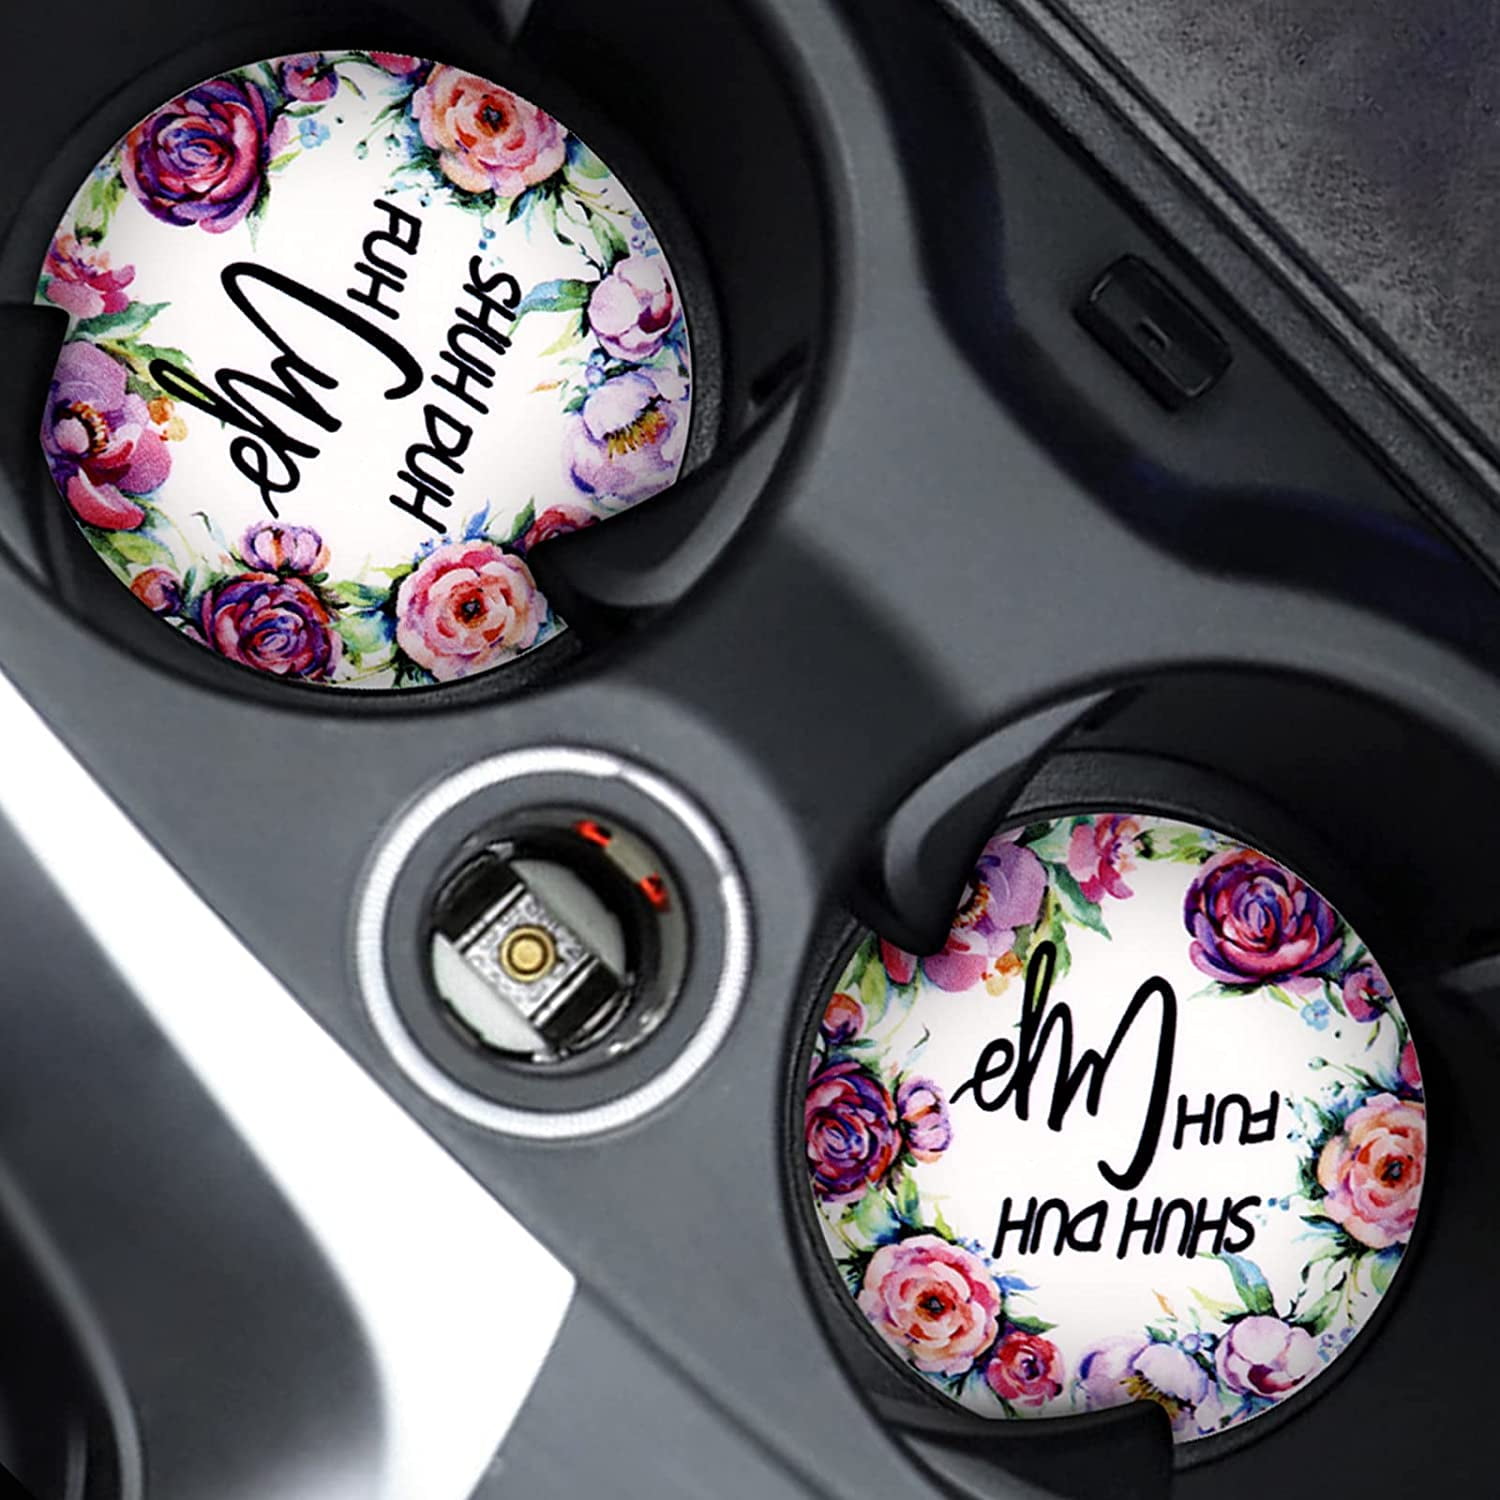 Absorbent Coasters for Car 2.75 inch Round Car Cup Holder Coasters Anti Slip Rubber Bottom GIFTPUZZ Novelty Red Roses Print Car Coasters 2 Pack Abstract Design for Women Girls Red Gray 